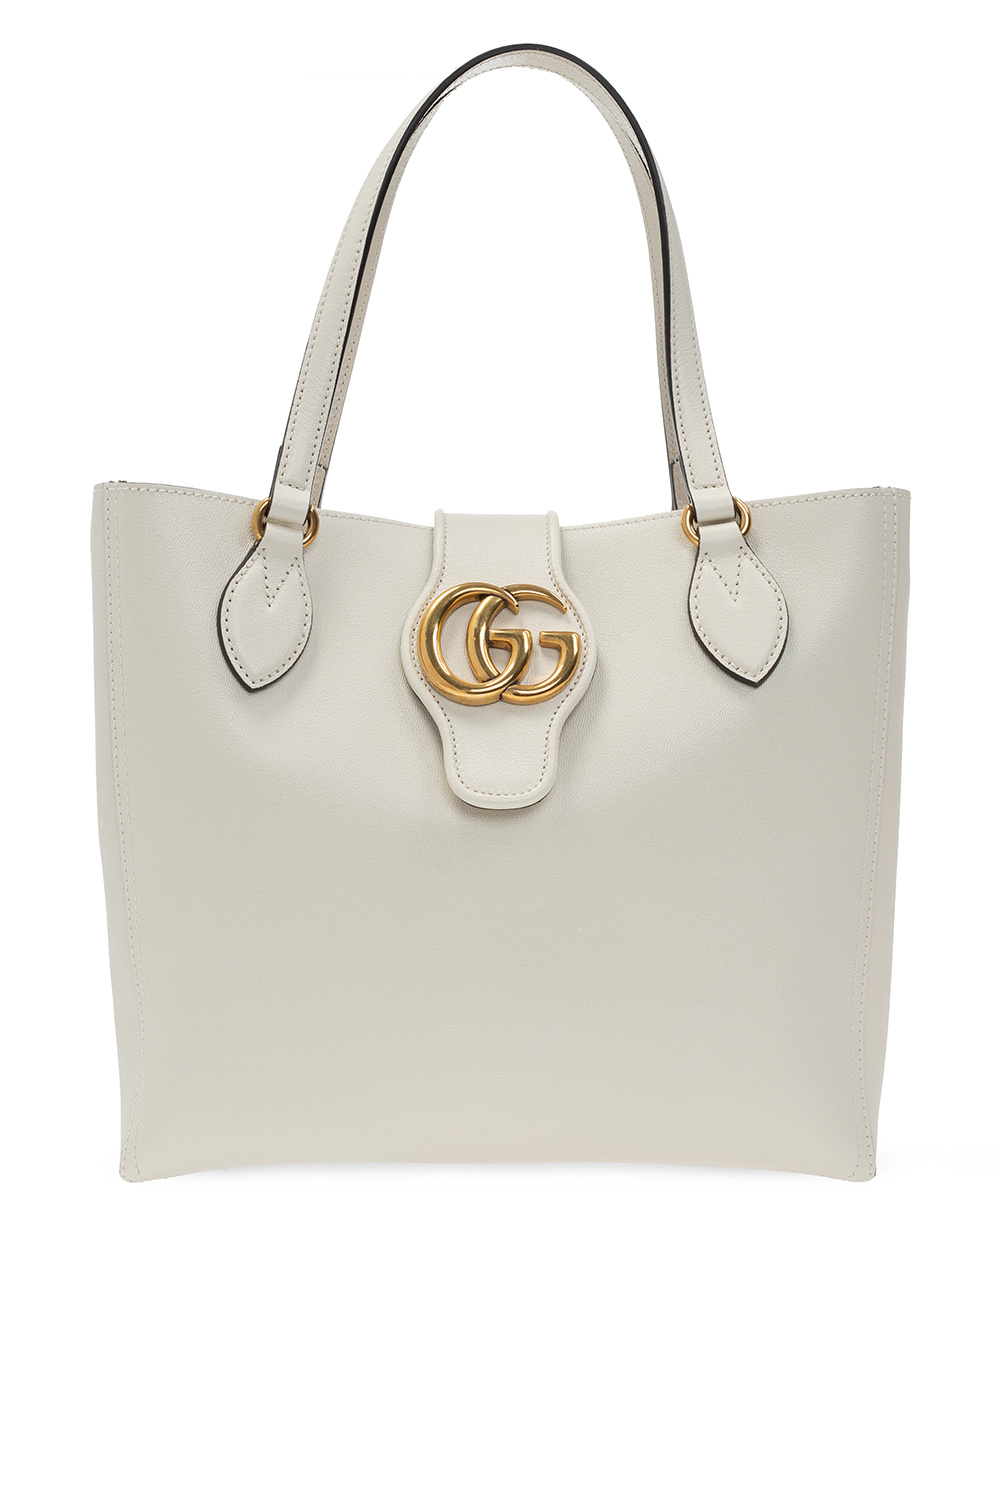 Gucci Dahlia Marmont White Handbag 652680 – Queen Bee of Beverly Hills